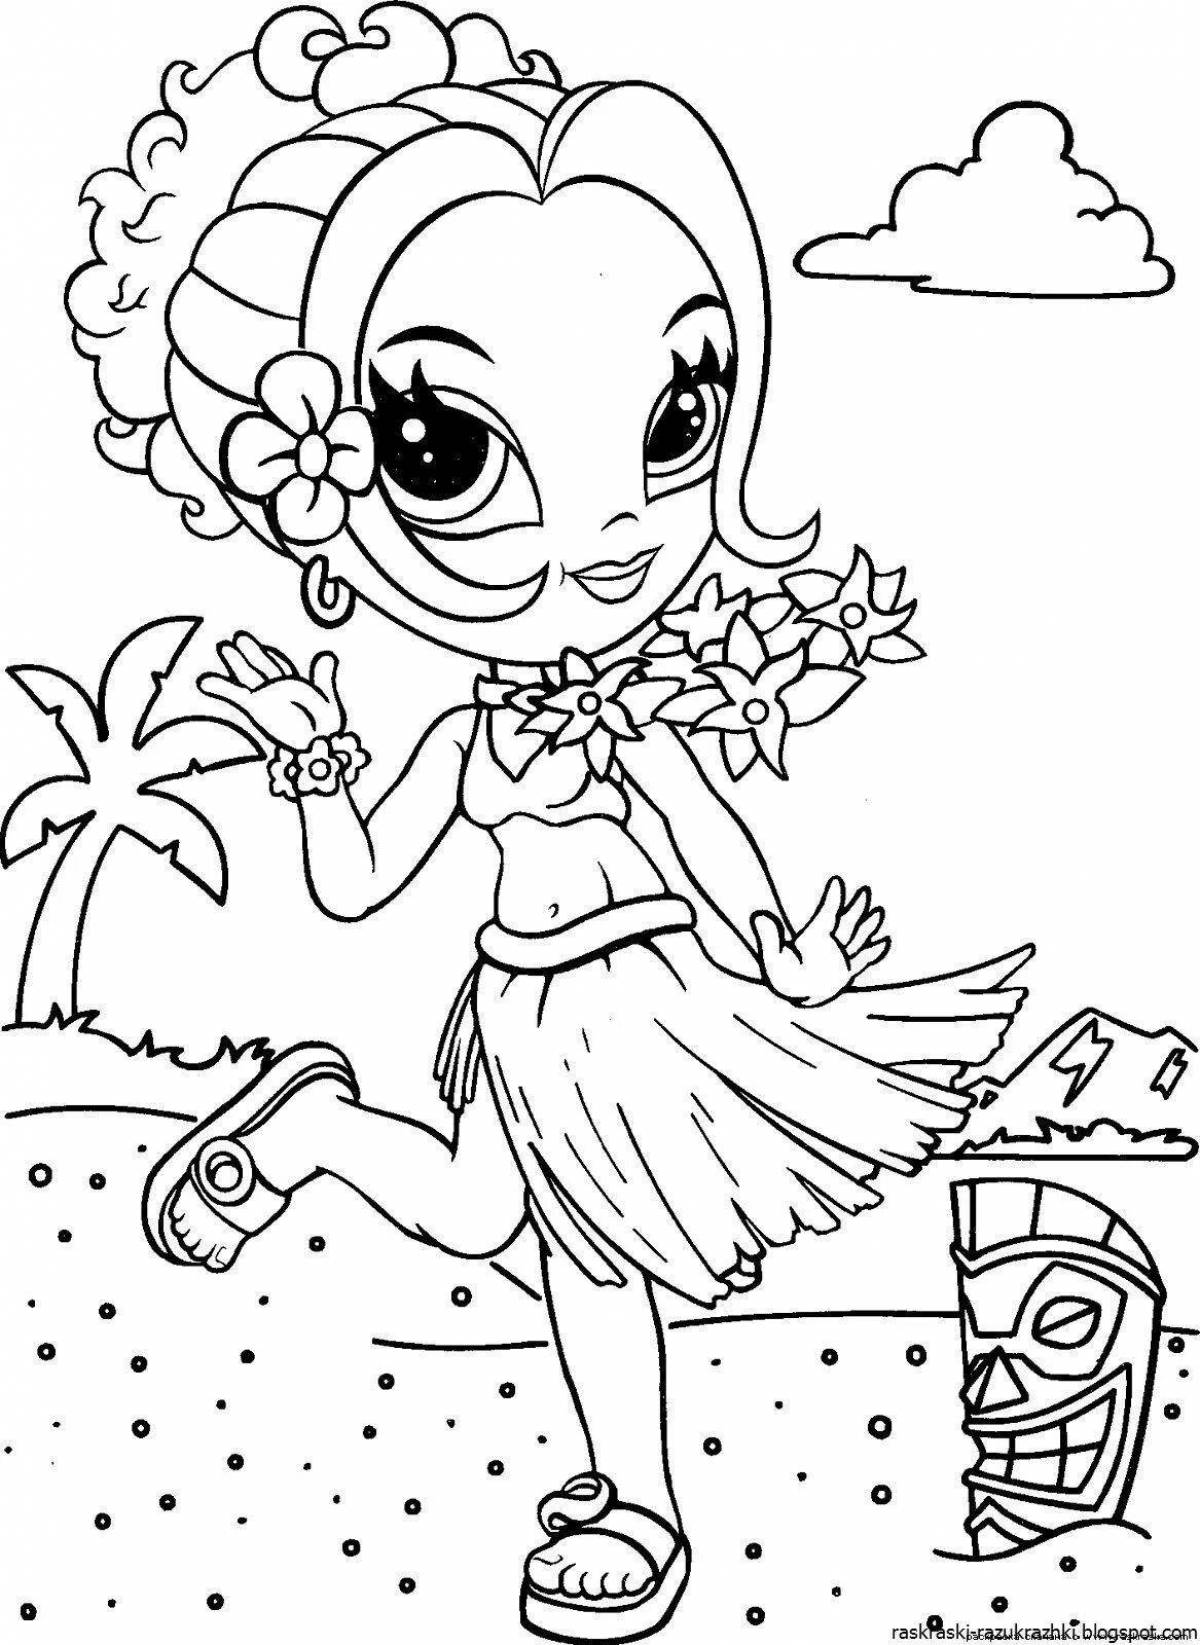 Colorful coloring book popular with girls